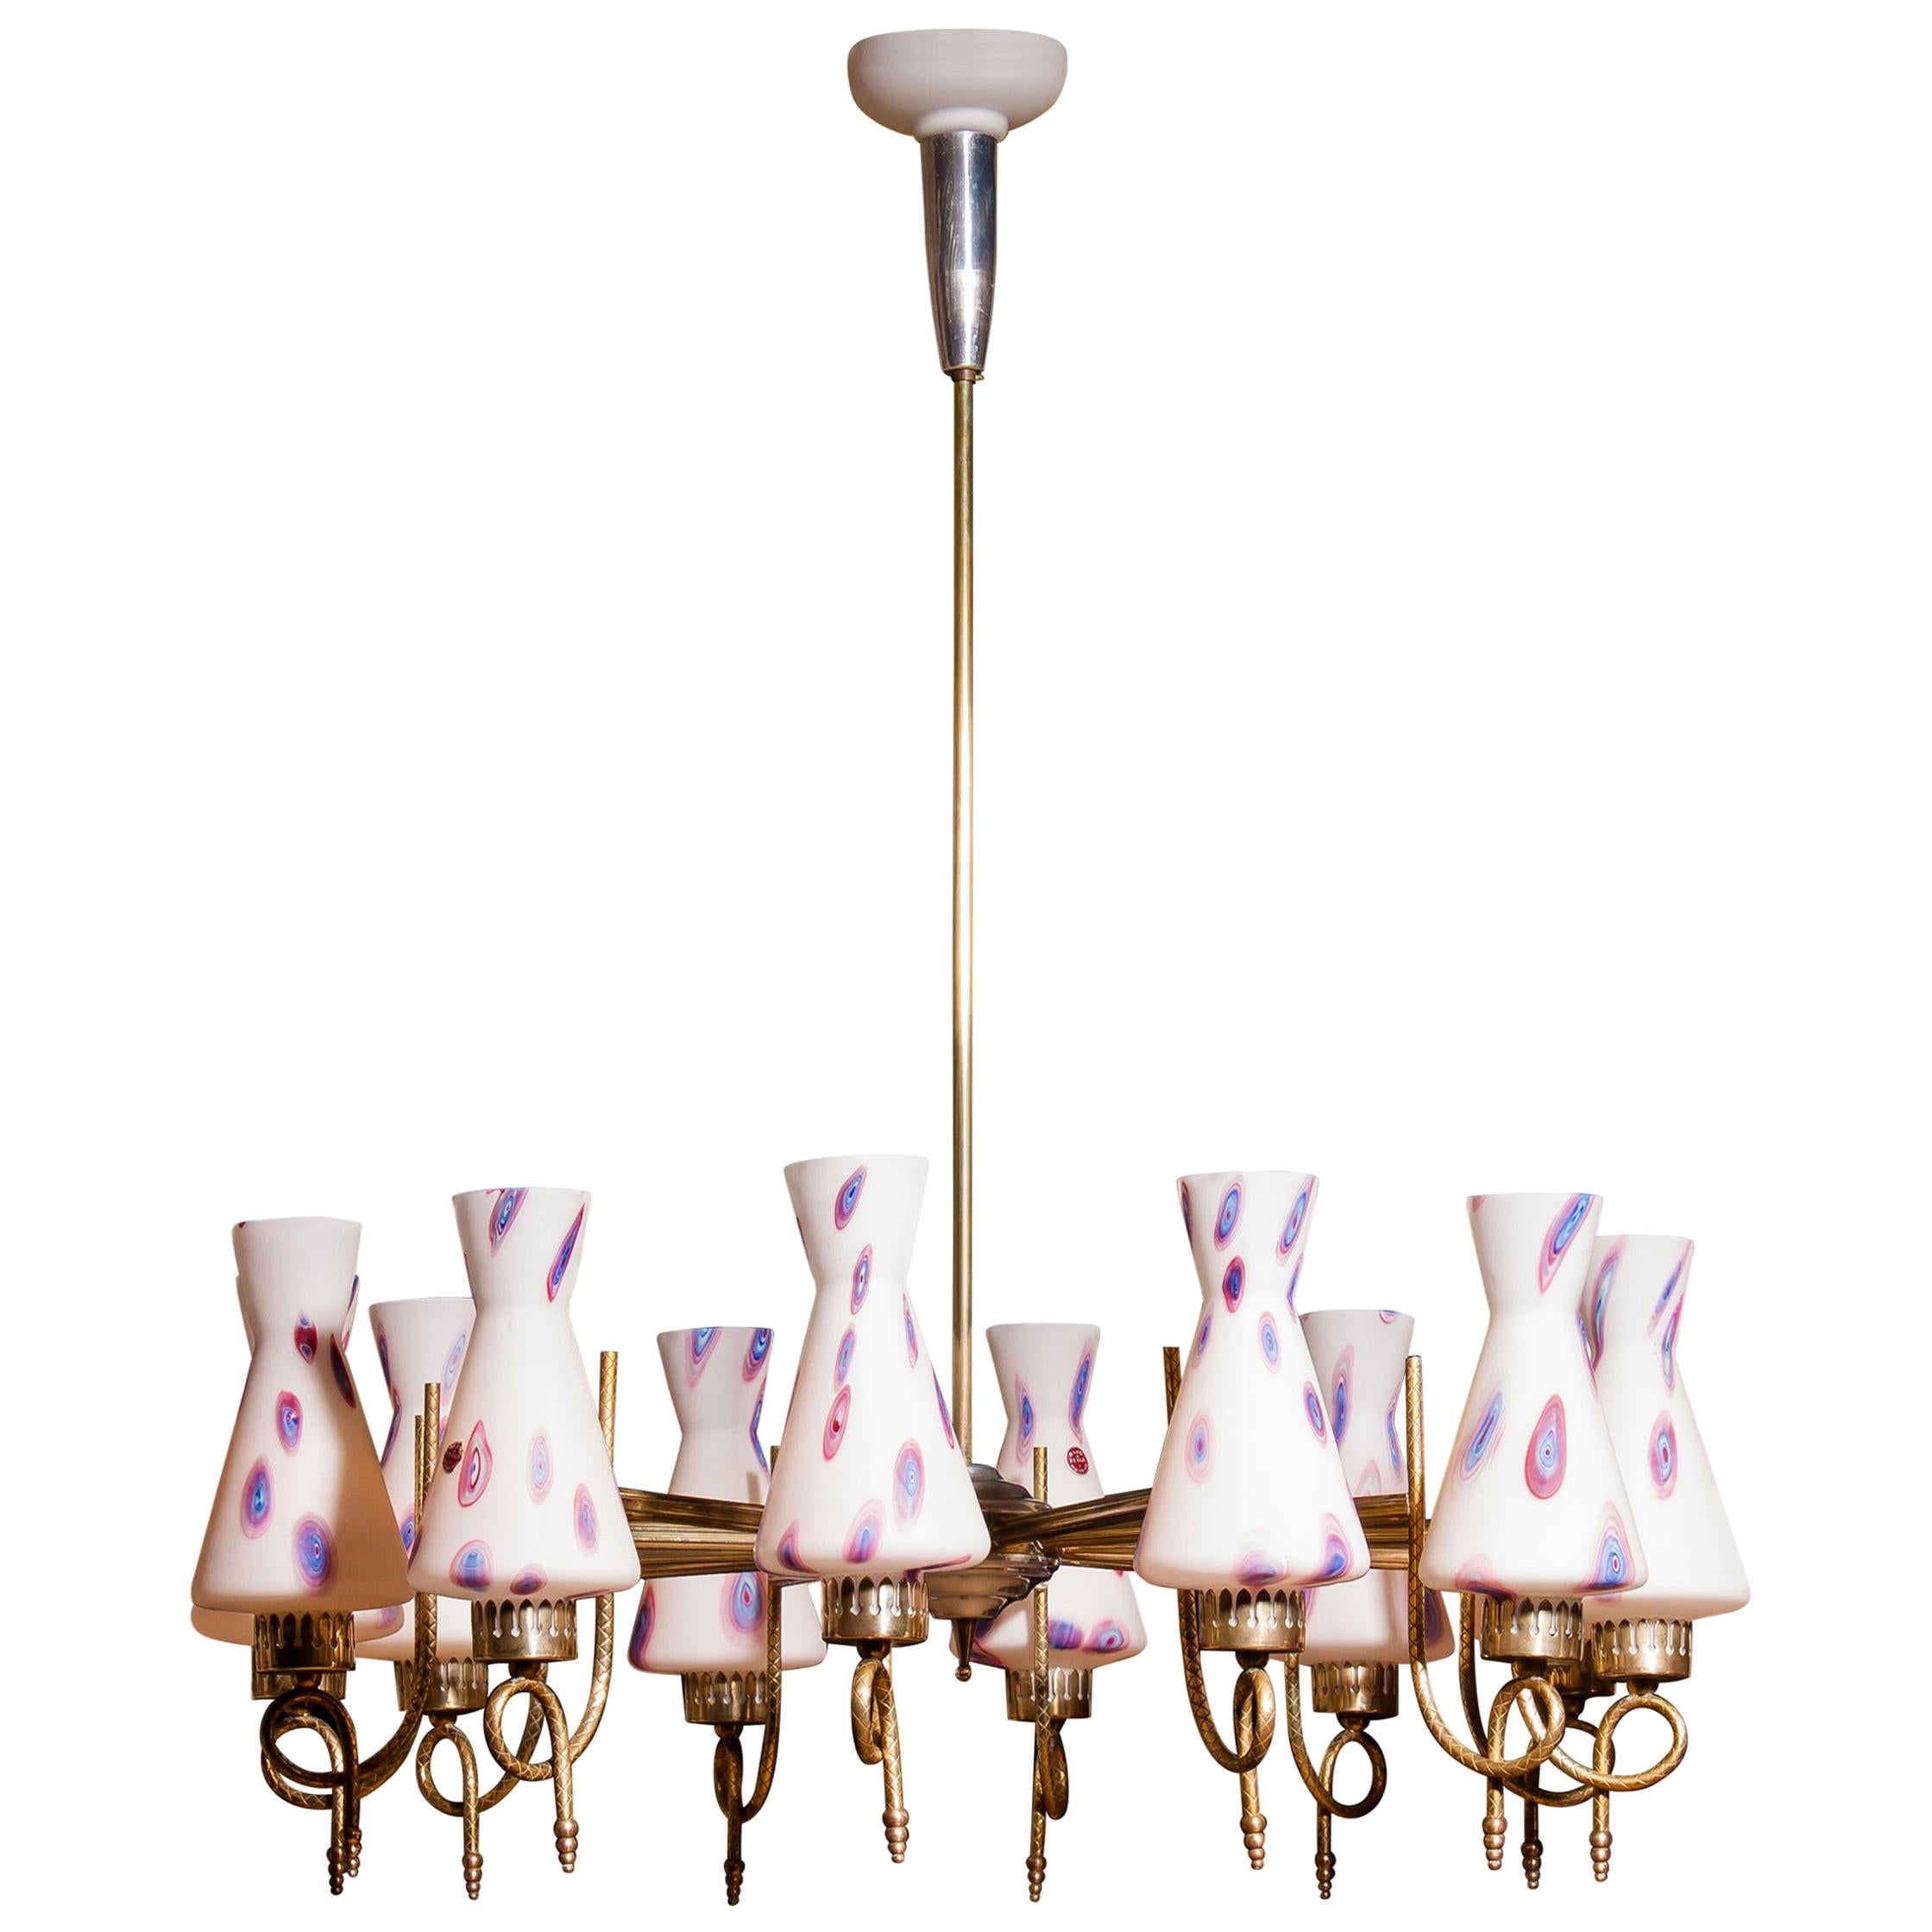 Magnificent large chandelier.
This lamp is made of a beautiful brass with polished aluminium shape with twelve white designed Murano glass shades.
The shades are labelled.
It is in an excellent working condition.
Period 1940s
Dimensions: H 90